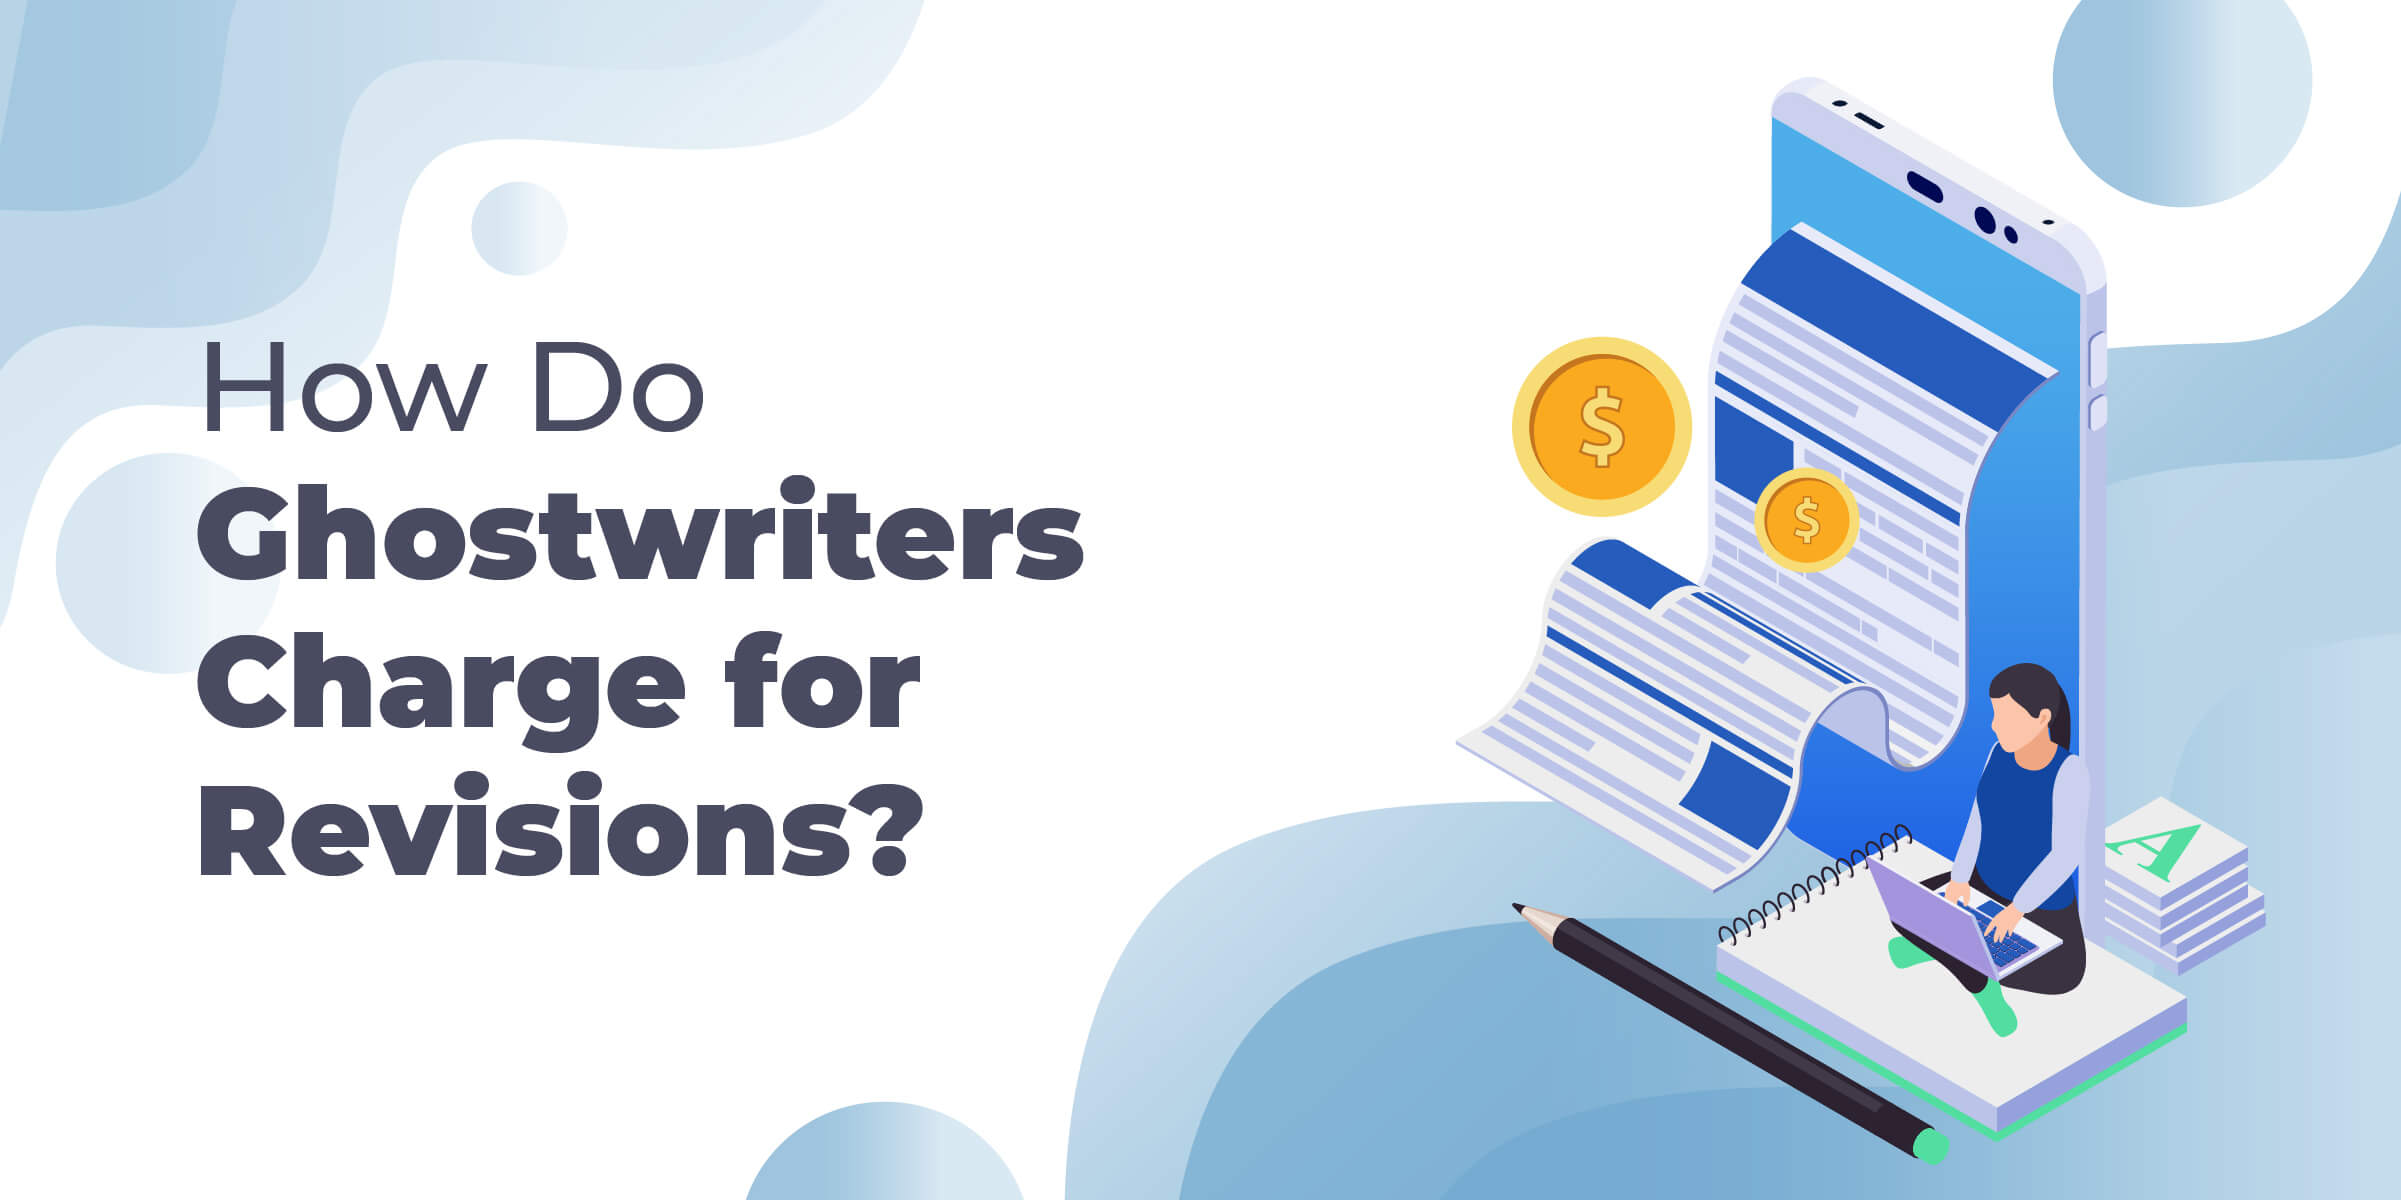 How Do Ghostwriters Charge for Revisions